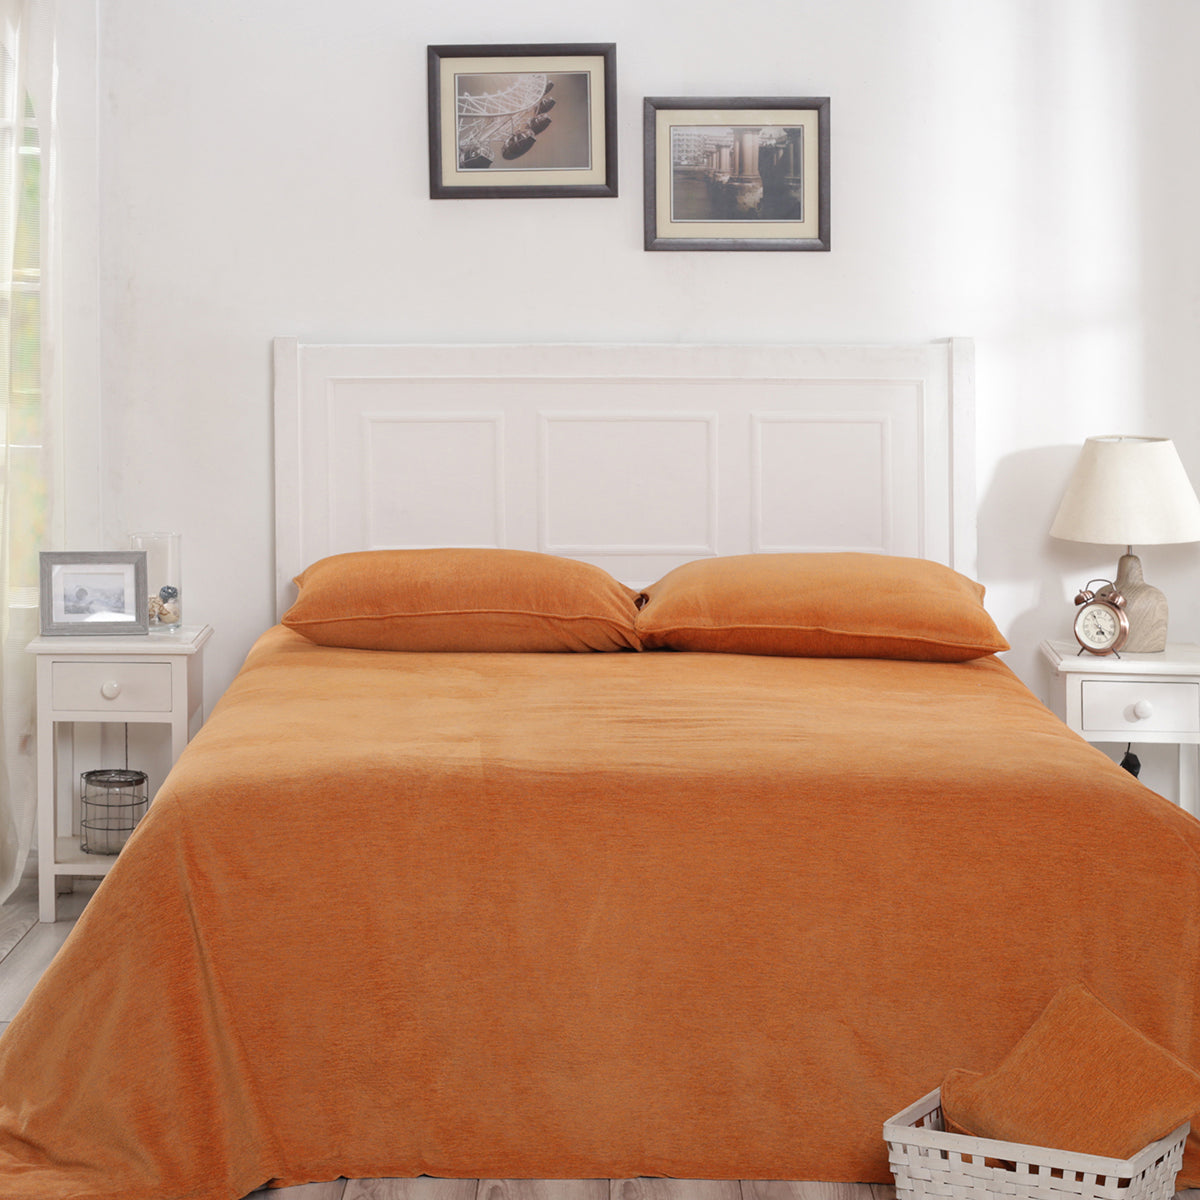 Charlotte Woven Apricot Bed Cover/Blanket